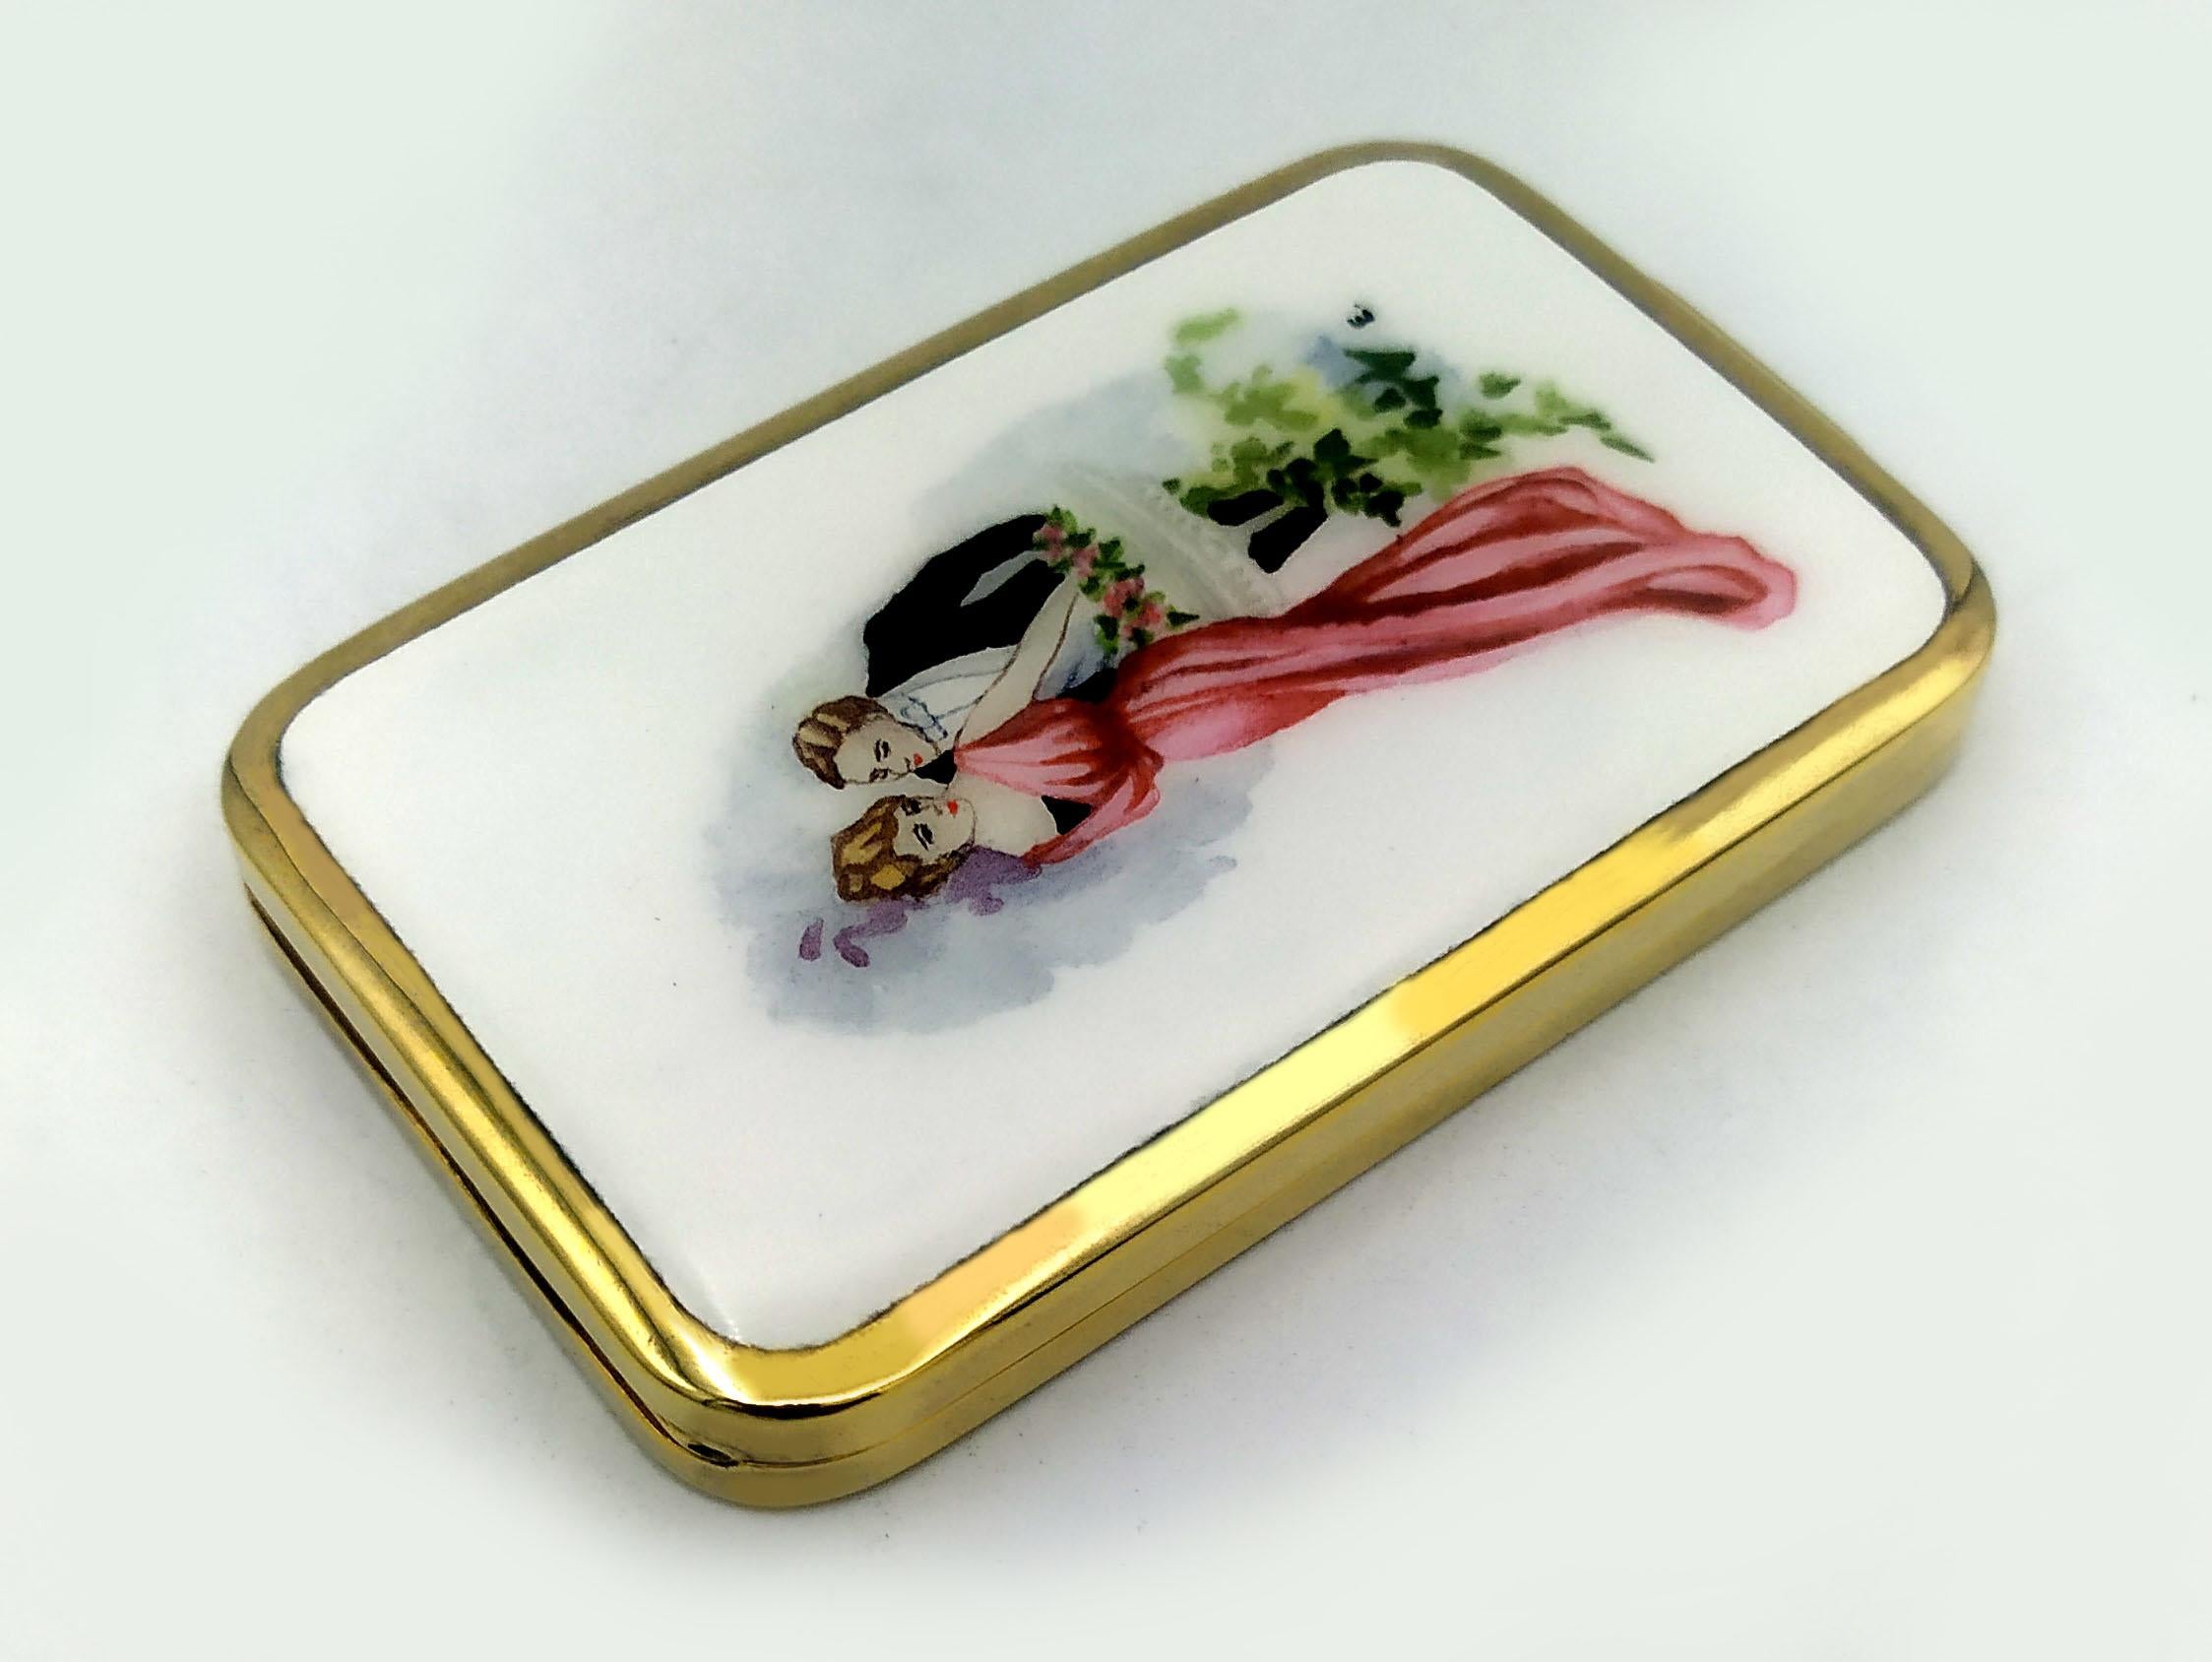 Rectangular desk cigarette case with rounded corners in sterling silver 925/1000 gold plated with fine hand-painted fire-enameled miniature depicting a romantic couple in Art Nouveau style. Dimensions cm. 5.7 x 9.2 x 1.2. Weight gr. 130. Designed by